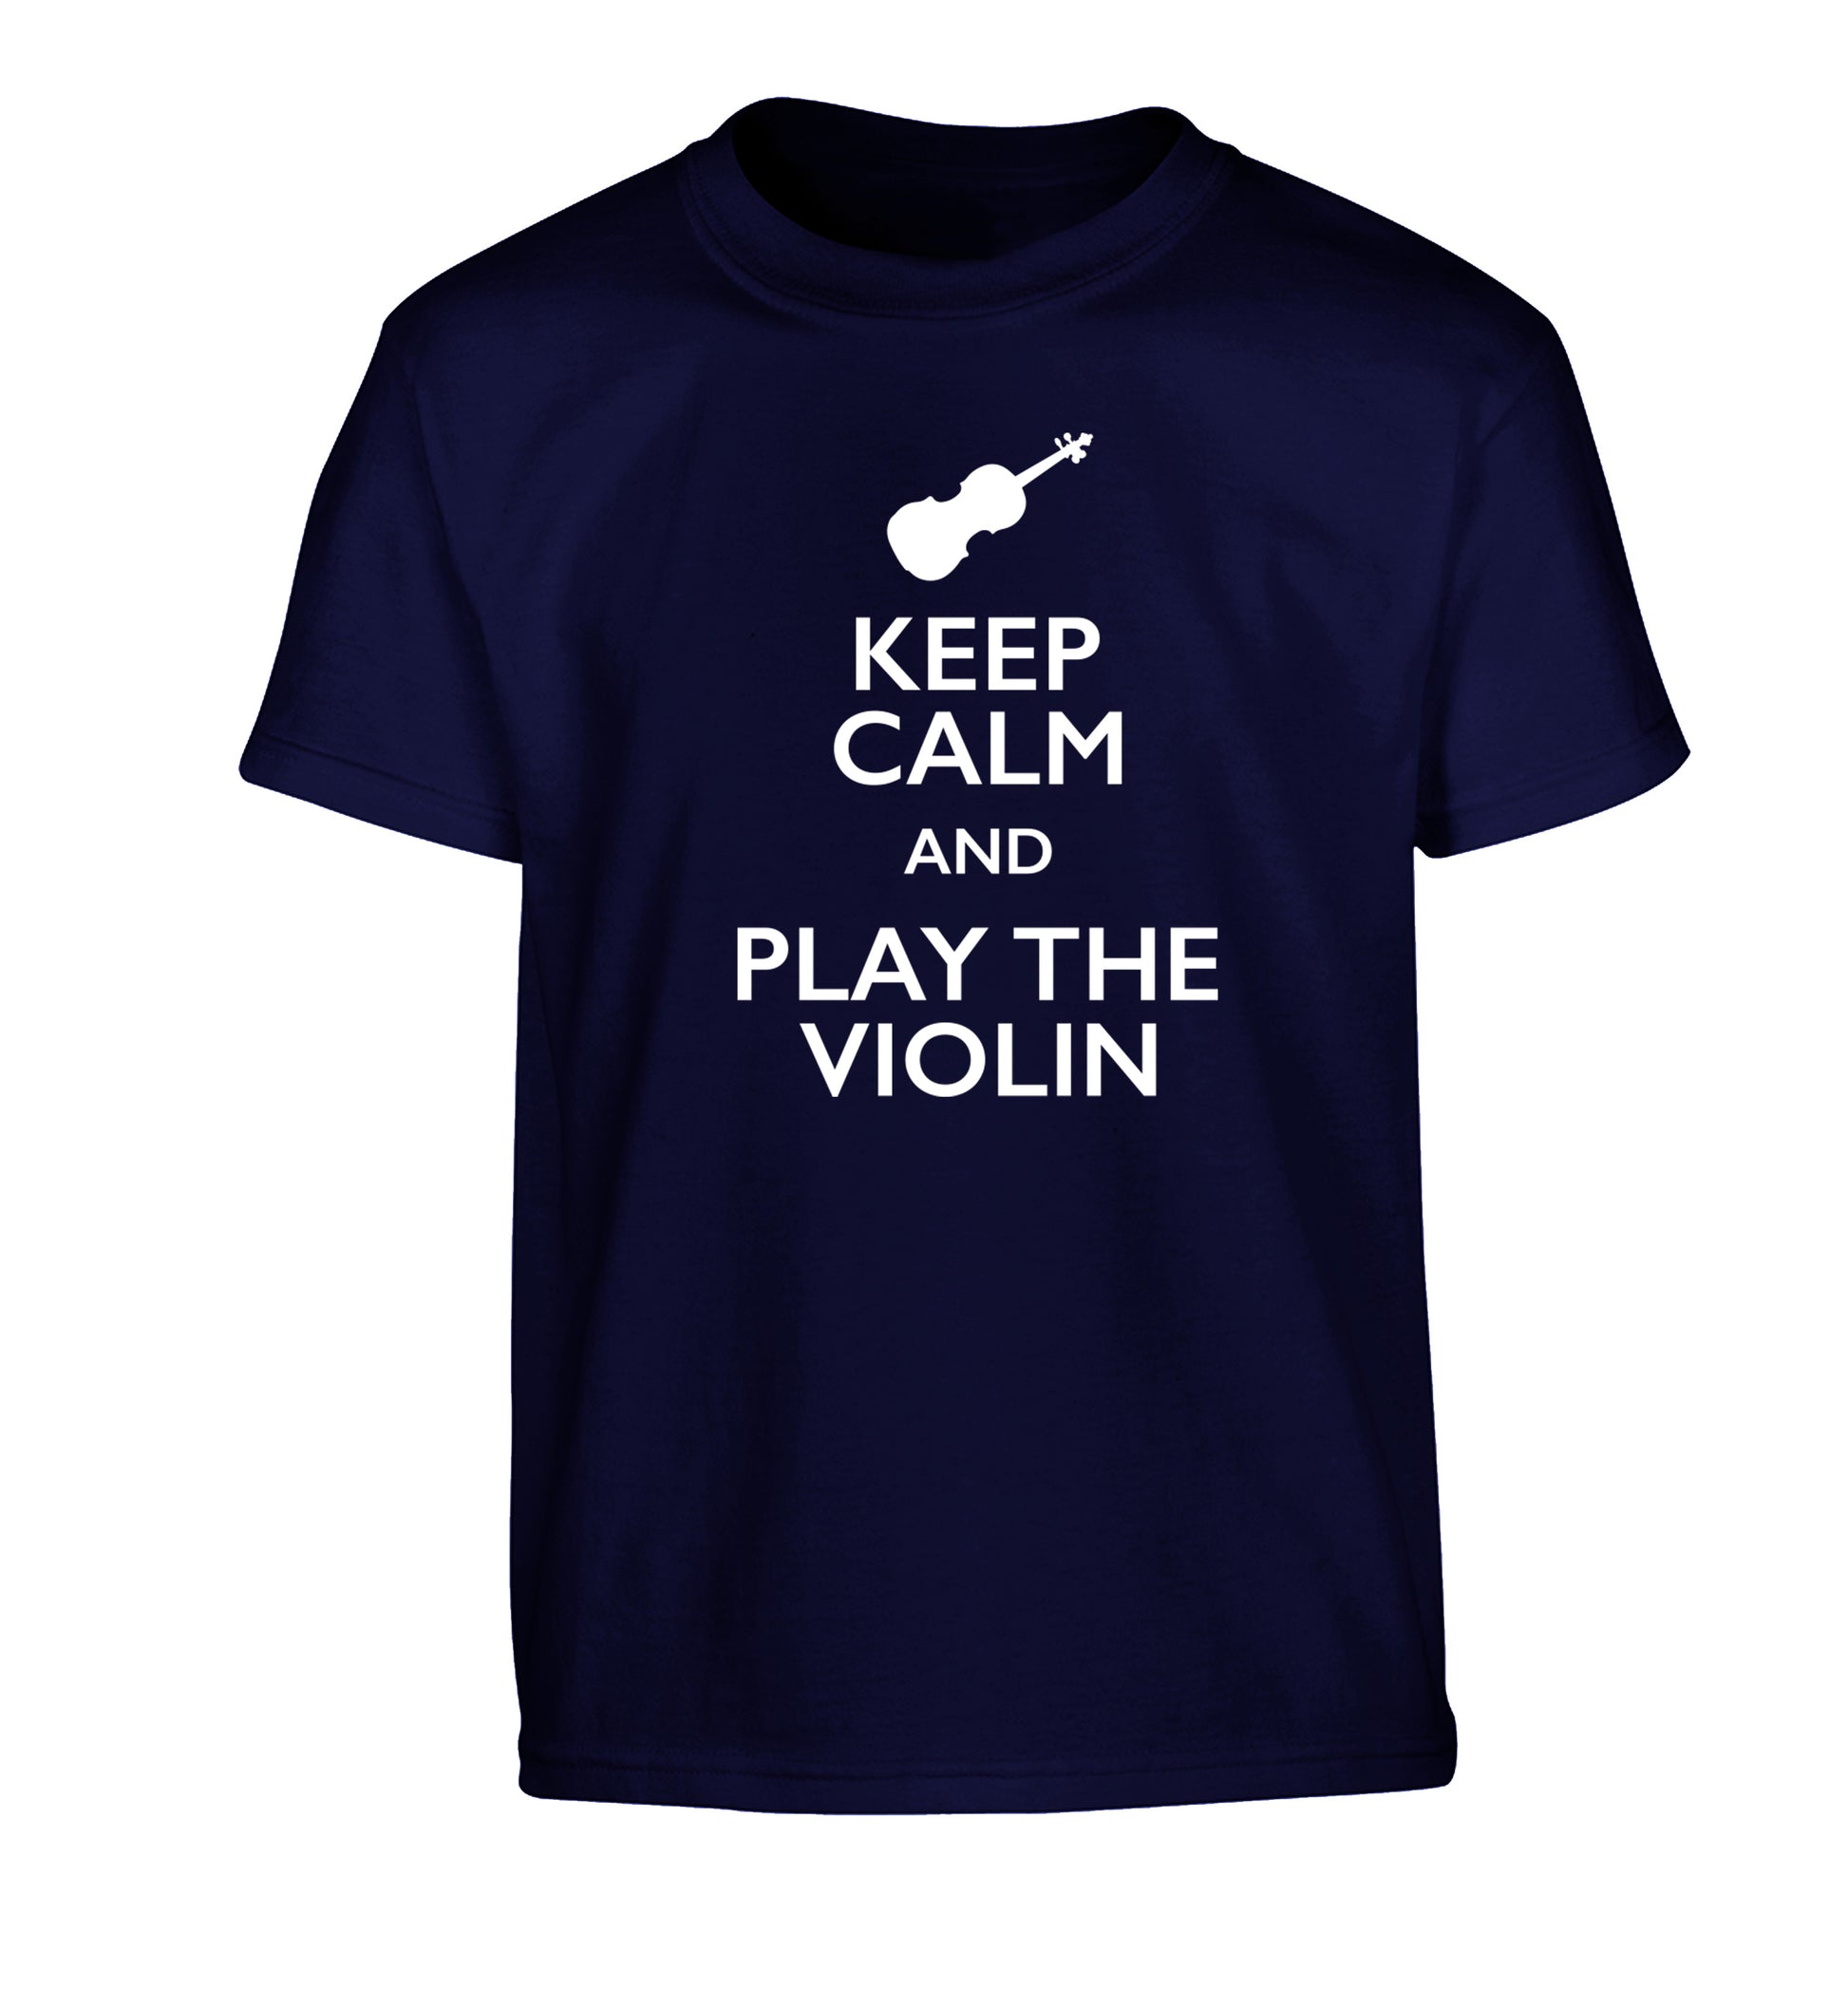 Keep calm and play the violin Children's navy Tshirt 12-13 Years